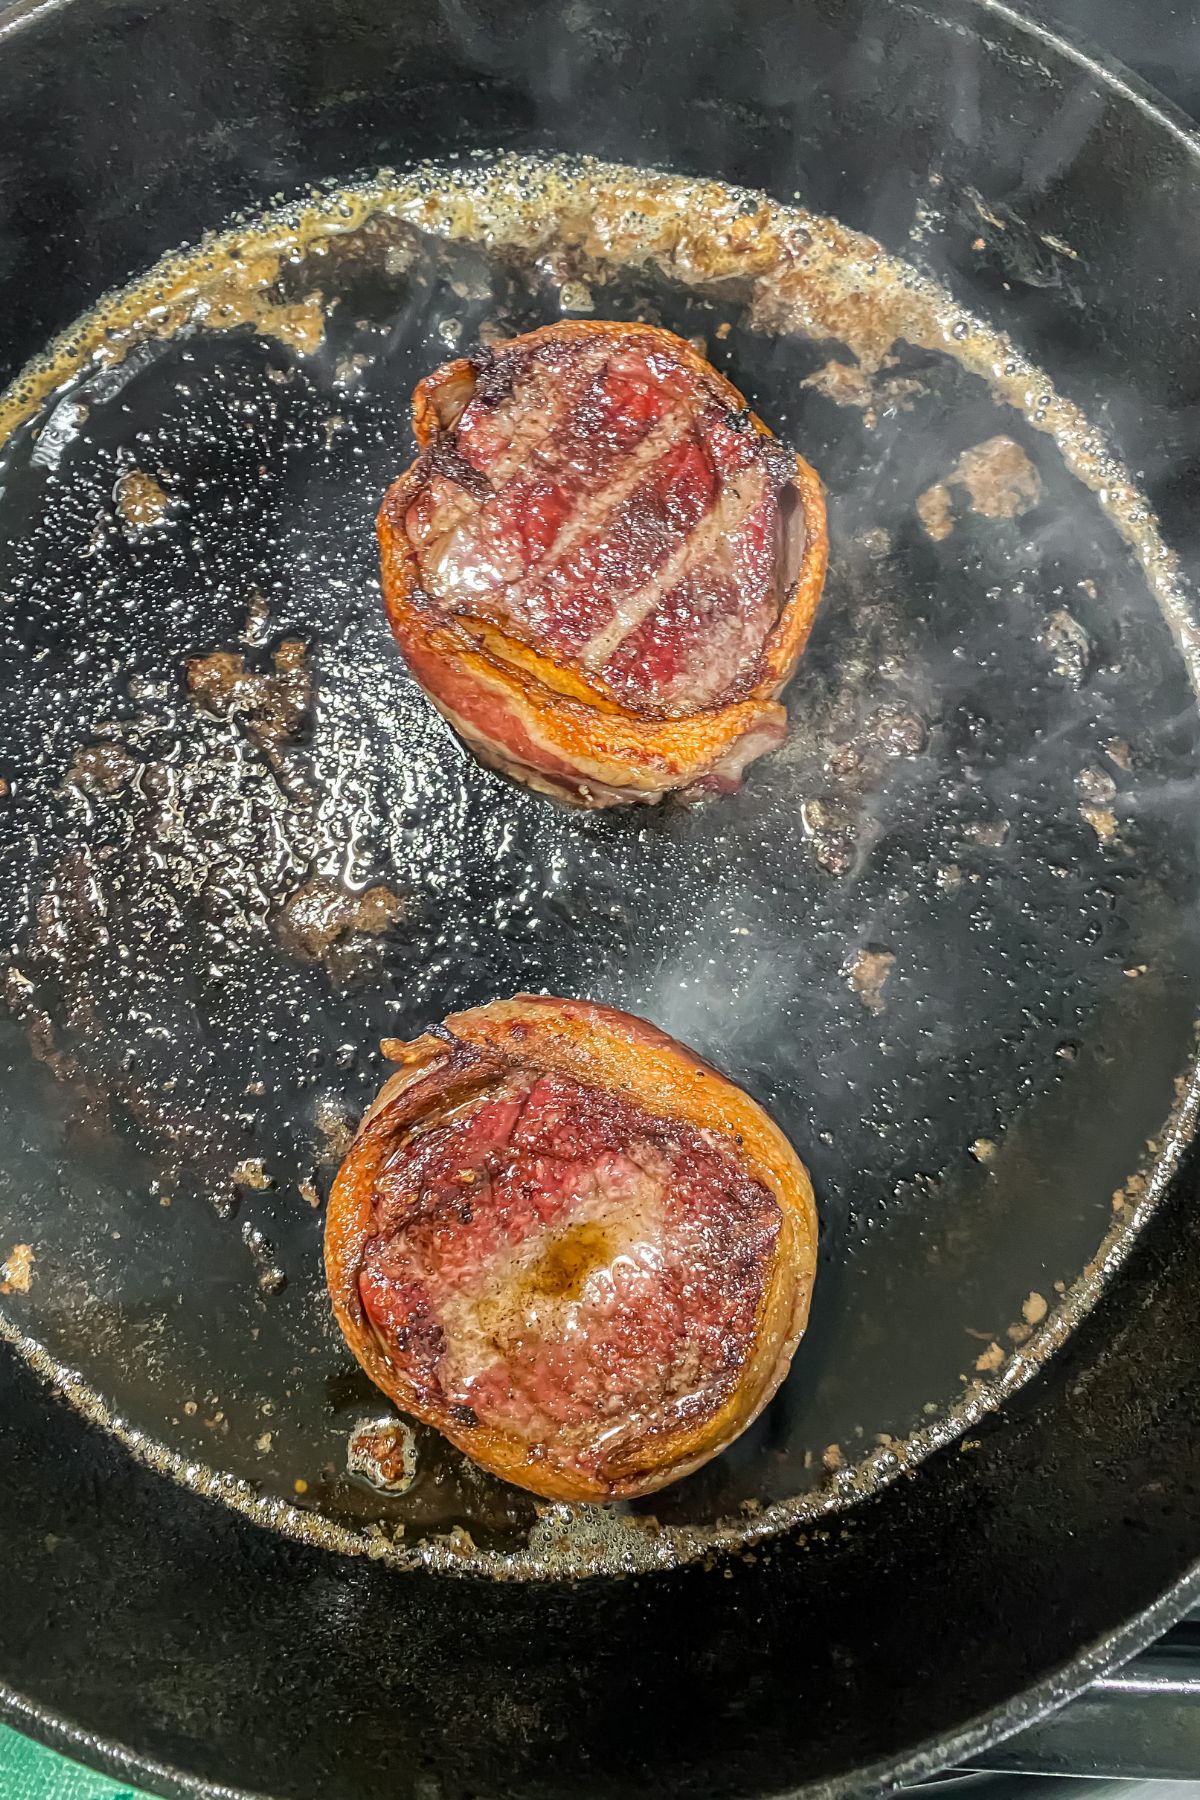 Smoked tender filets are being cooked in a frying pan.